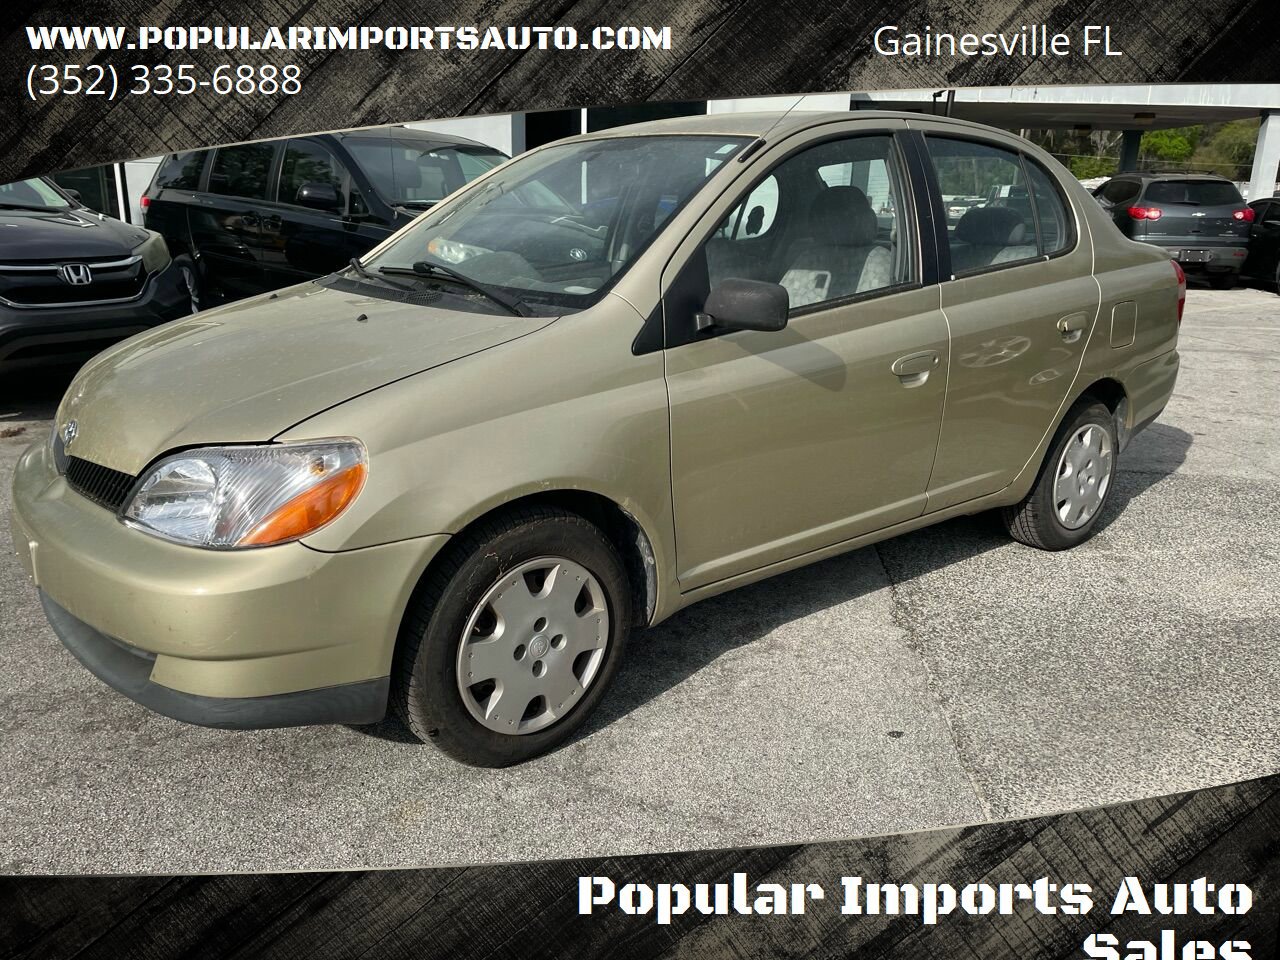 Used 2001 Toyota Echo for Sale Right Now - Autotrader